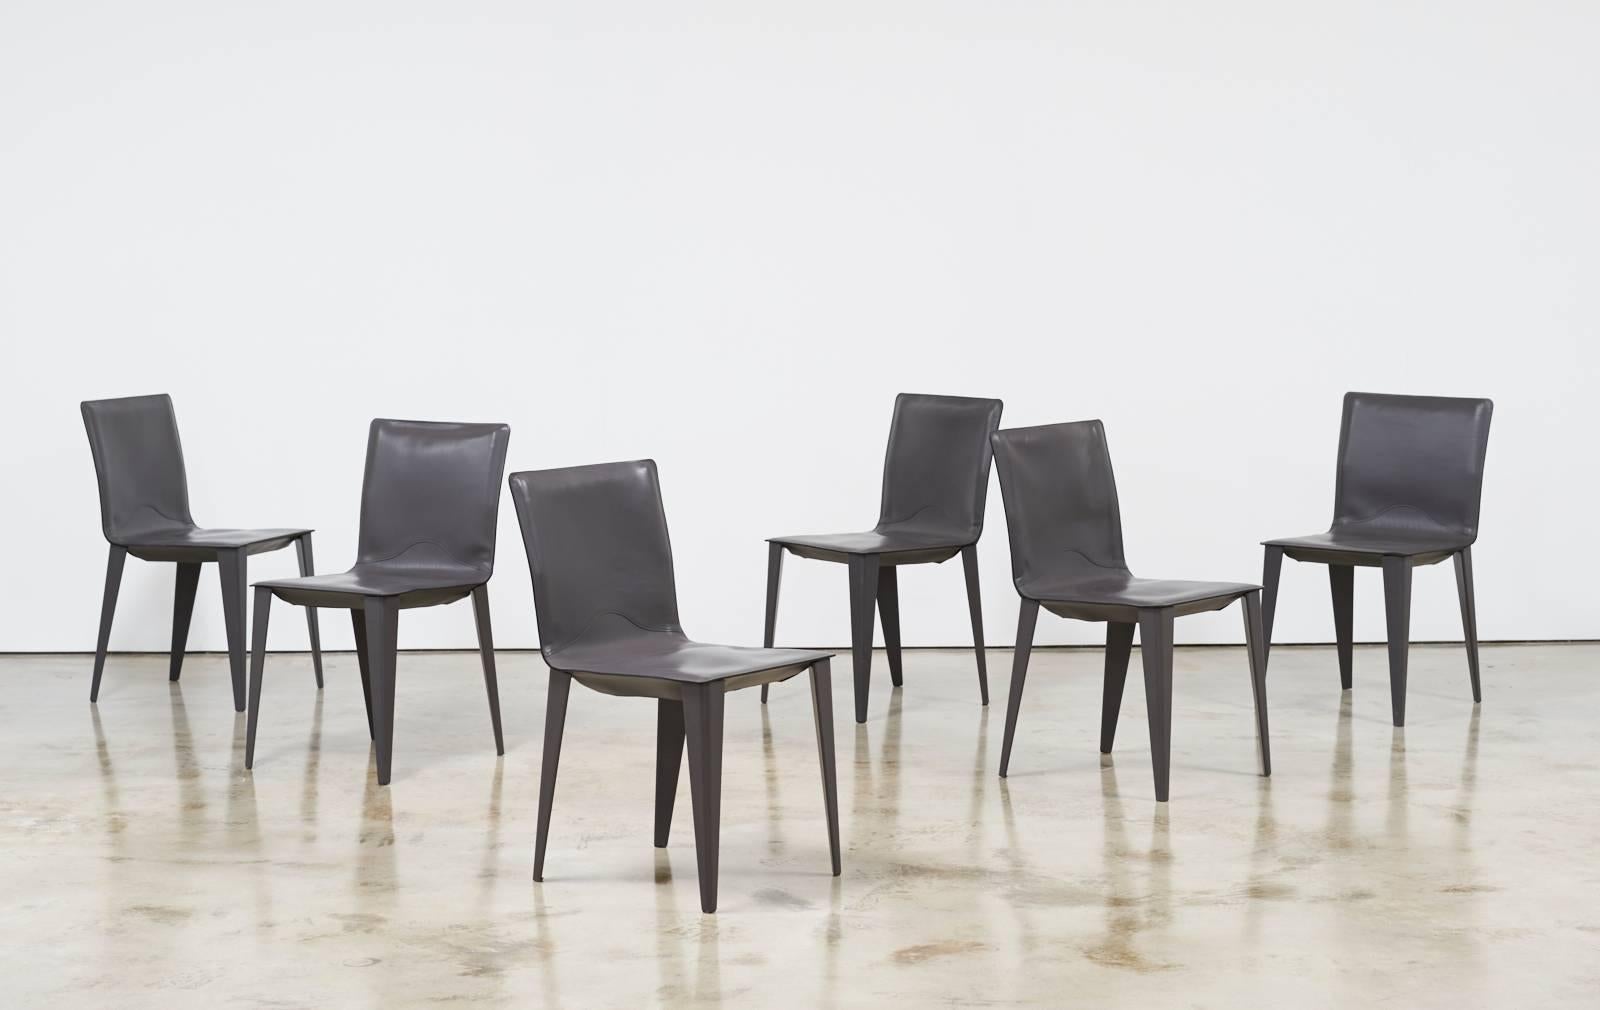 Set of six chairs in grey leather by Matteo Grassi

Italy, circa 1970s

All chairs original to the set
Measures: 32.5 H
17.5 seat height
17 W x 18.5 D in.